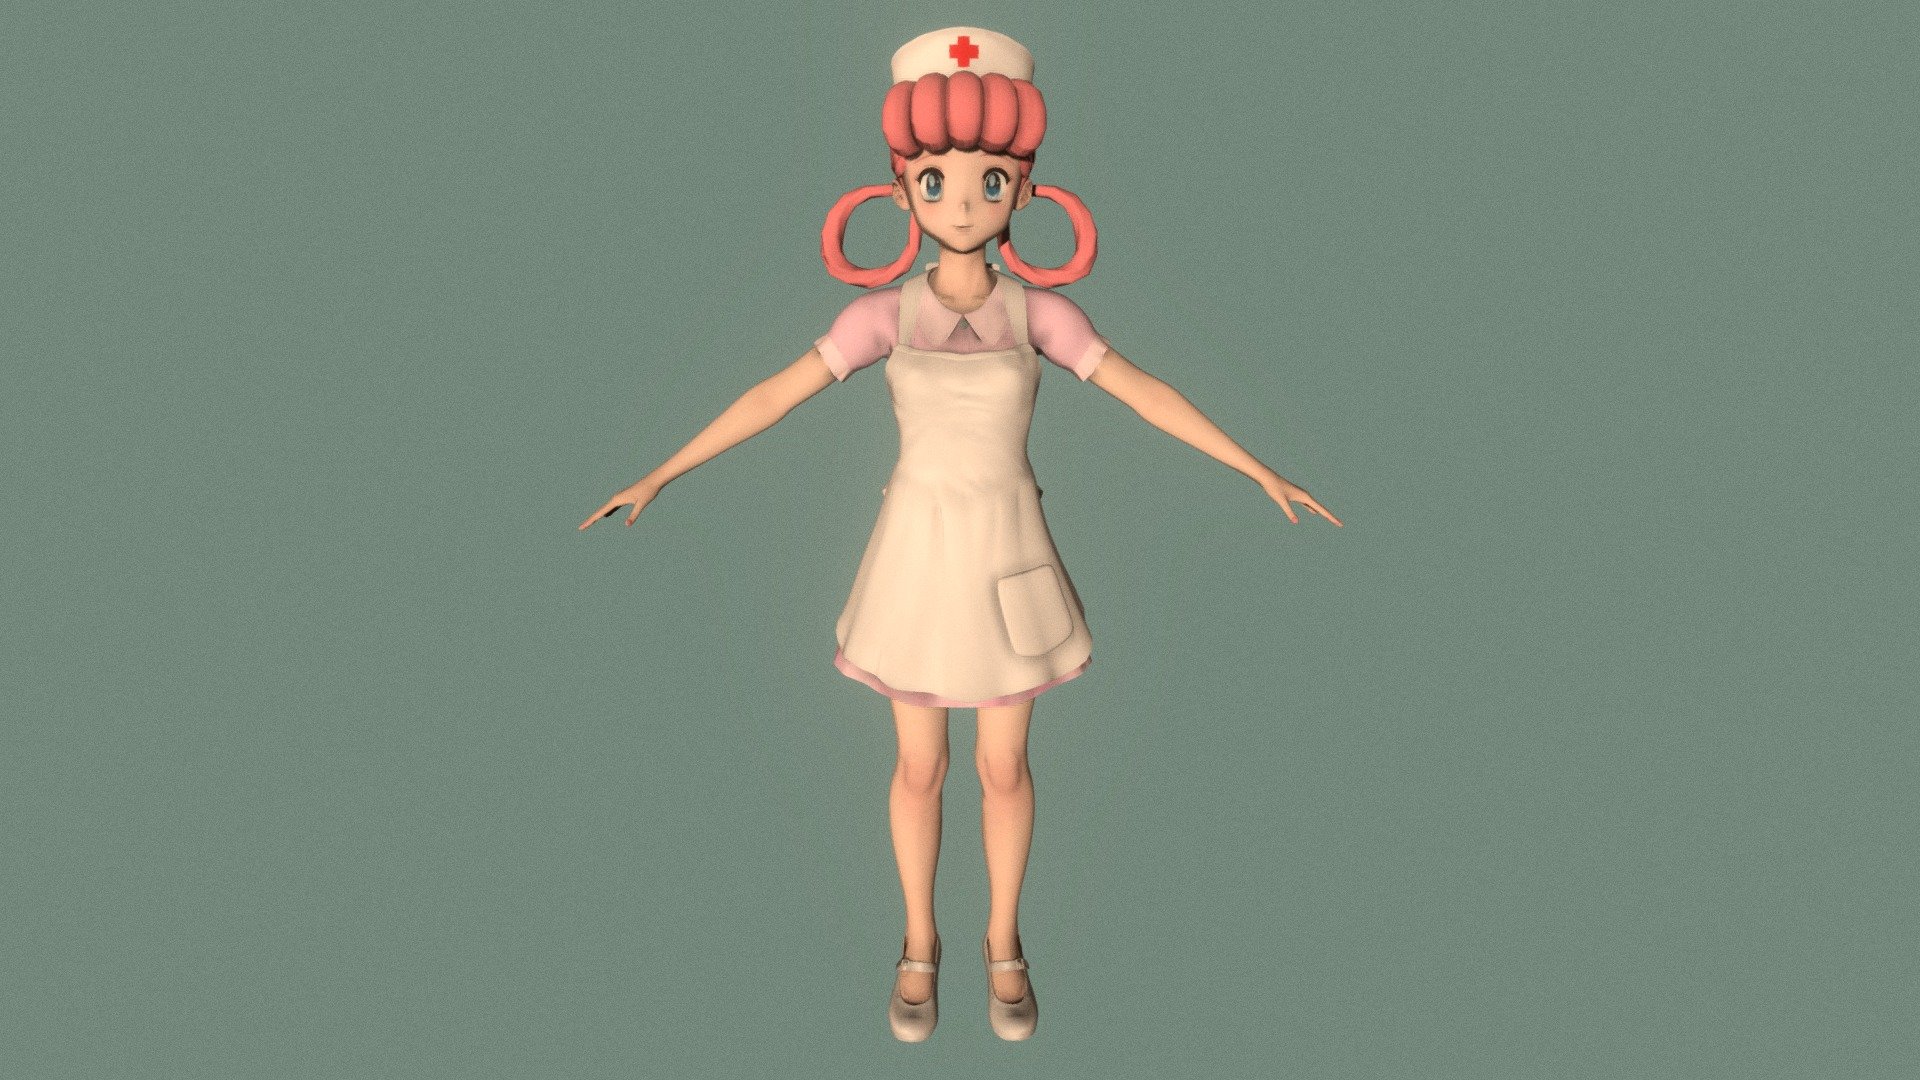 T-pose rigged model of anime girl Joy (Pokemon).

Body and clothings are rigged and skinned by 3ds Max CAT system.

Eye direction and facial animation controlled by Morpher modifier / Shape Keys / Blendshape.

This product include .FBX (ver. 7200) and .MAX (ver. 2010) files.

3ds Max version is turbosmoothed to give a high quality render (as you can see here).

Original main body mesh have ~7.000 polys.

This 3D model may need some tweaking to adapt the rig system to games engine and other platforms.

I support convert model to various file formats (the rig data will be lost in this process): 3DS; AI; ASE; DAE; DWF; DWG; DXF; FLT; HTR; IGS; M3G; MQO; OBJ; SAT; STL; W3D; WRL; X.

You can buy all of my models in one pack to save cost: https://sketchfab.com/3d-models/all-of-my-anime-girls-c5a56156994e4193b9e8fa21a3b8360b

And I can make commission models.

If you have any questions, please leave a comment or contact me via my email 3d.eden.project@gmail.com 3d model